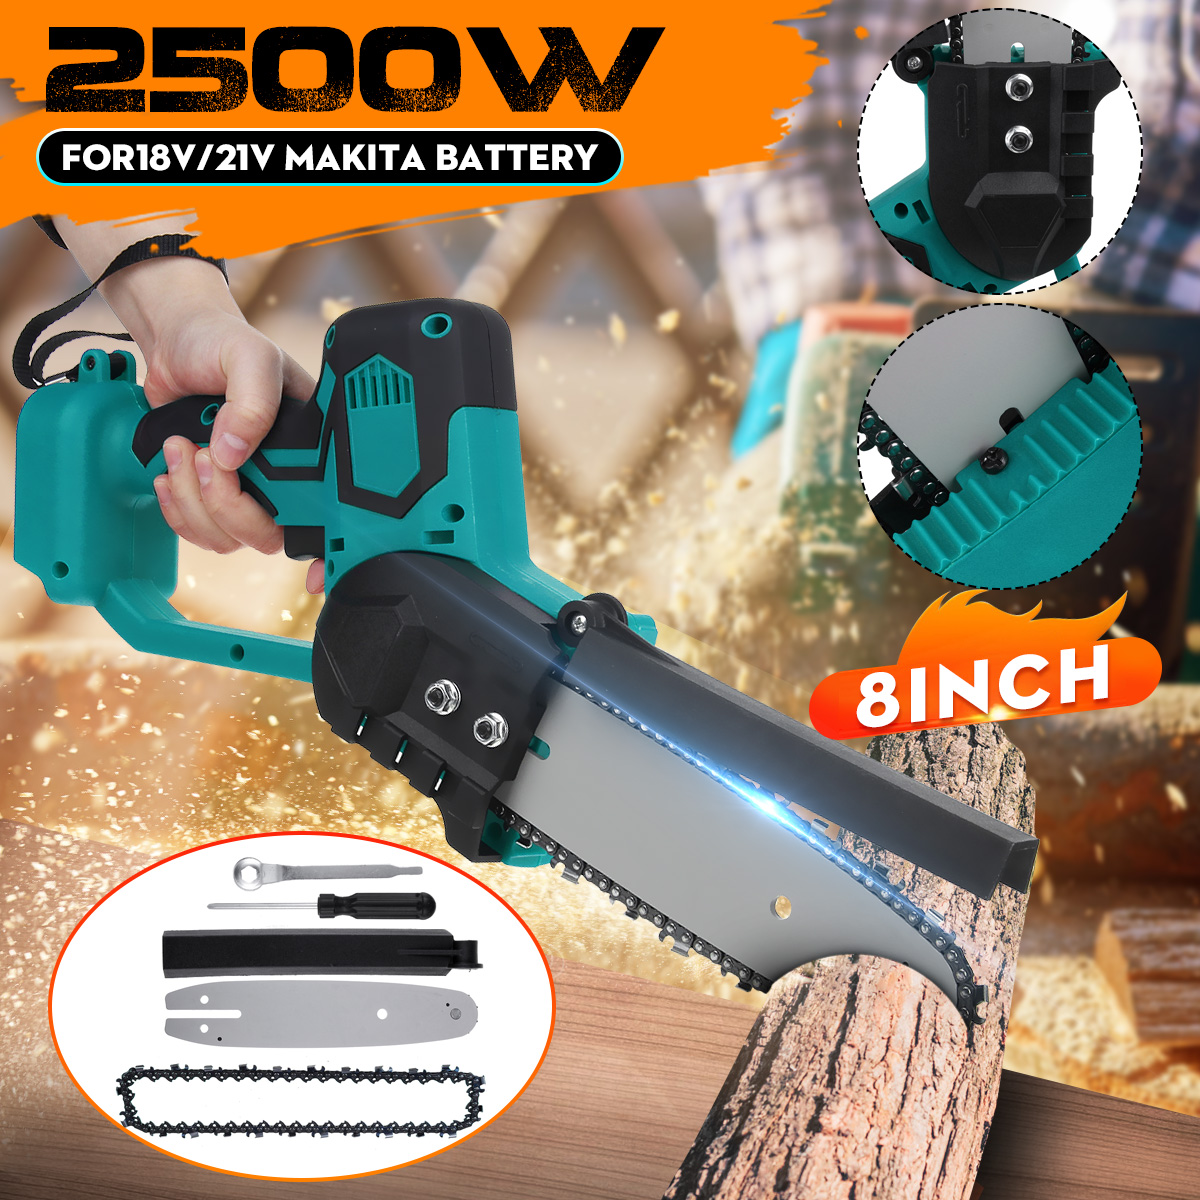 Kiwarm-8-Inch-Cordless-Electric-Chain-Saw-One-Hand-Saw-Woodworking-Cutter-for-Makita-1821V-Battery-1804678-2